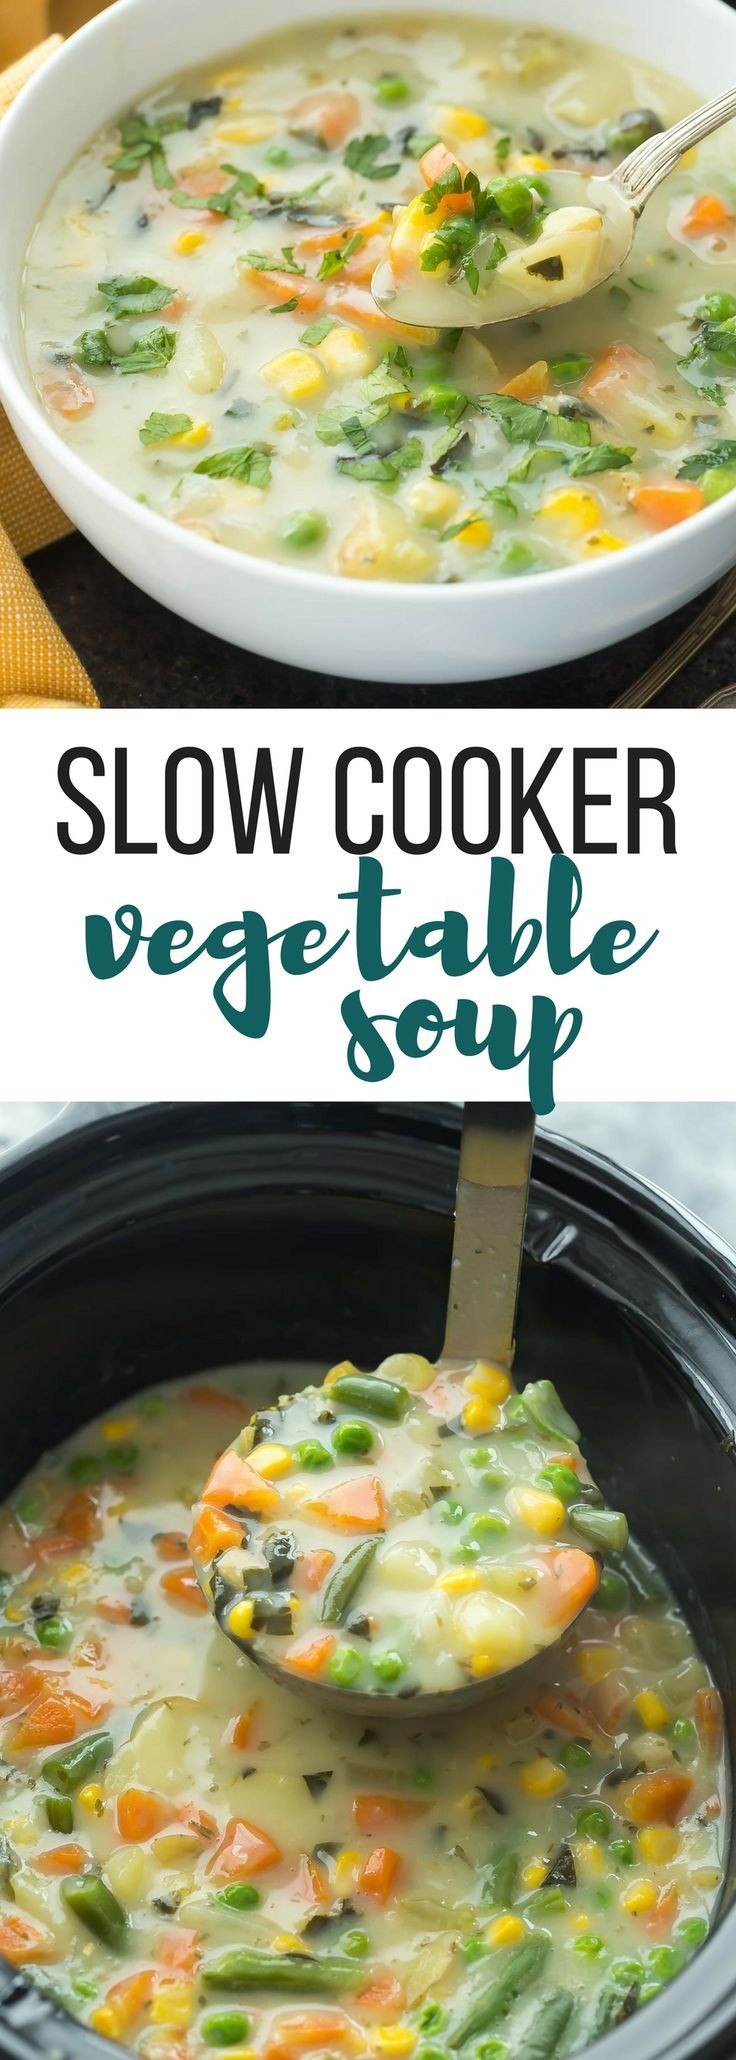 Low Calorie Soup Recipes For Slow Cookers
 This Slow Cooker Creamy Ve able Soup is a hearty